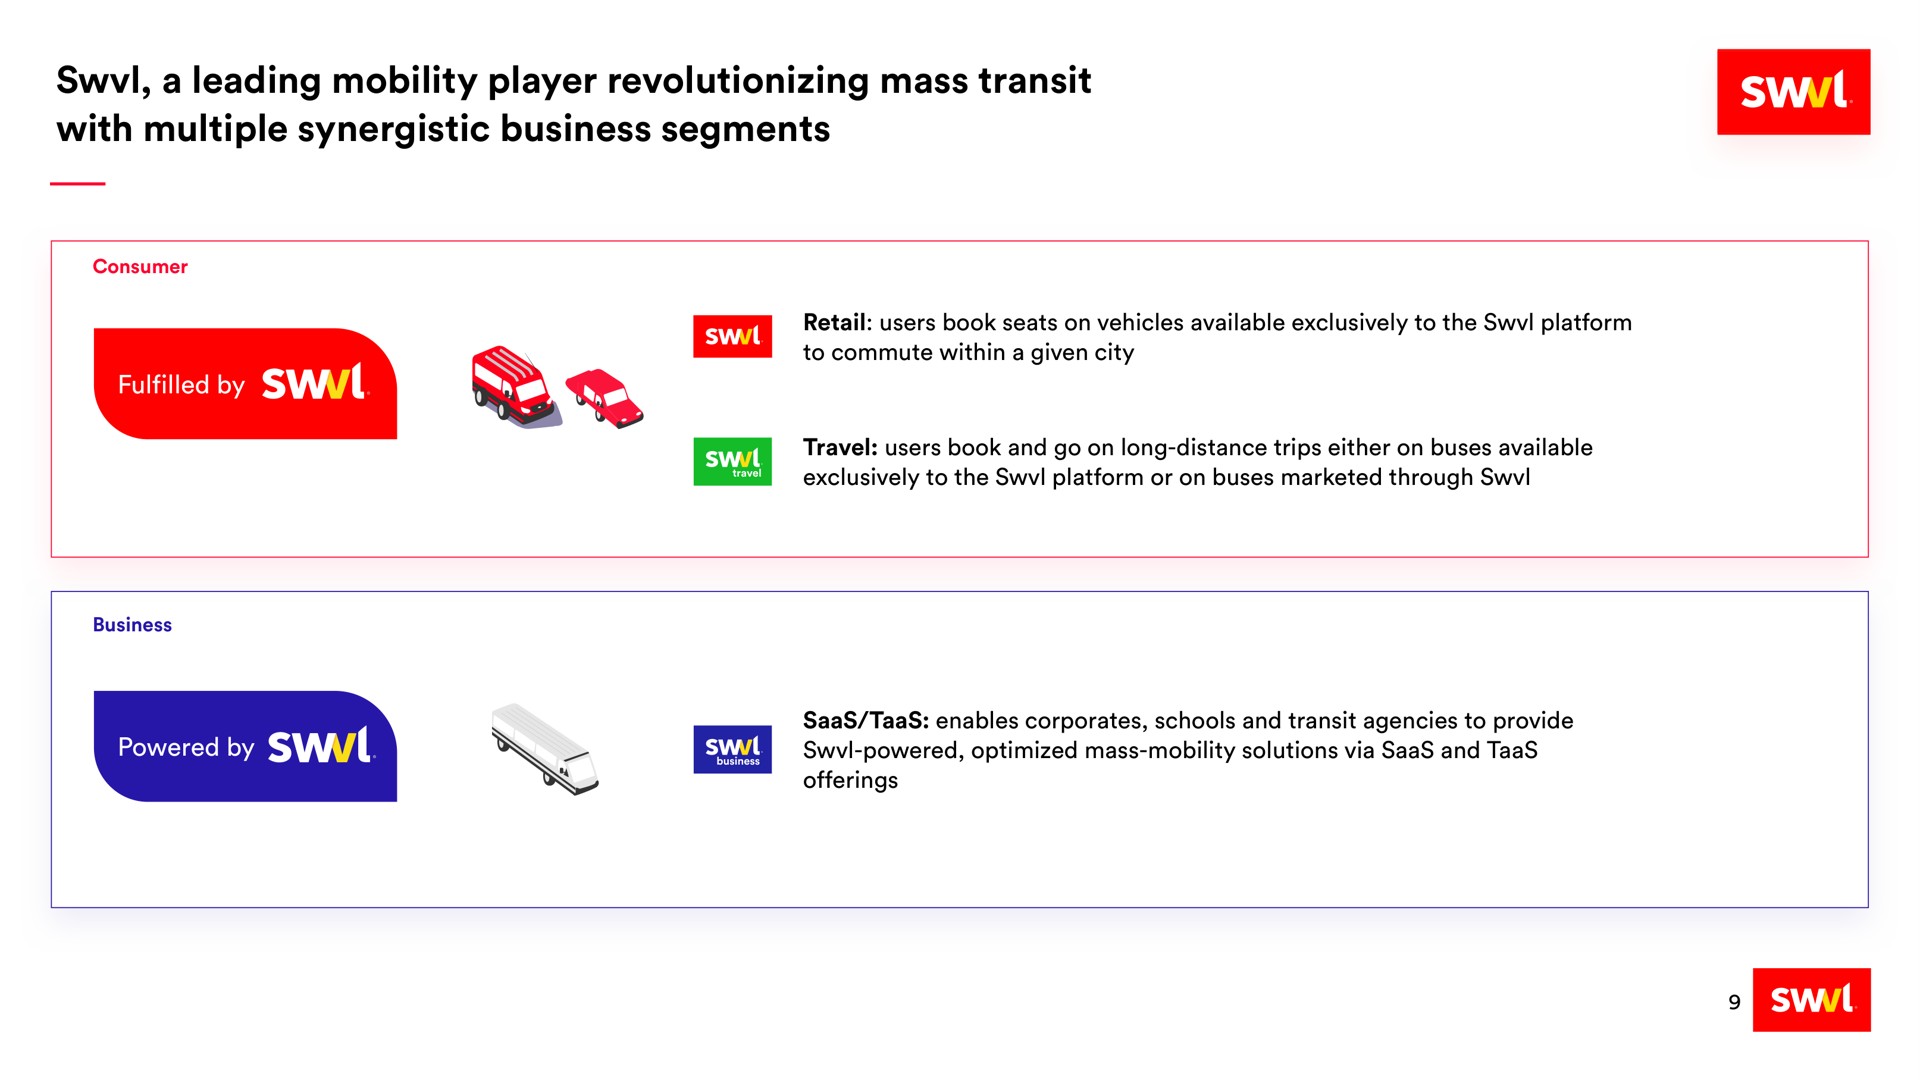 a leading mobility player revolutionizing mass transit with multiple synergistic business segments by | Swvl